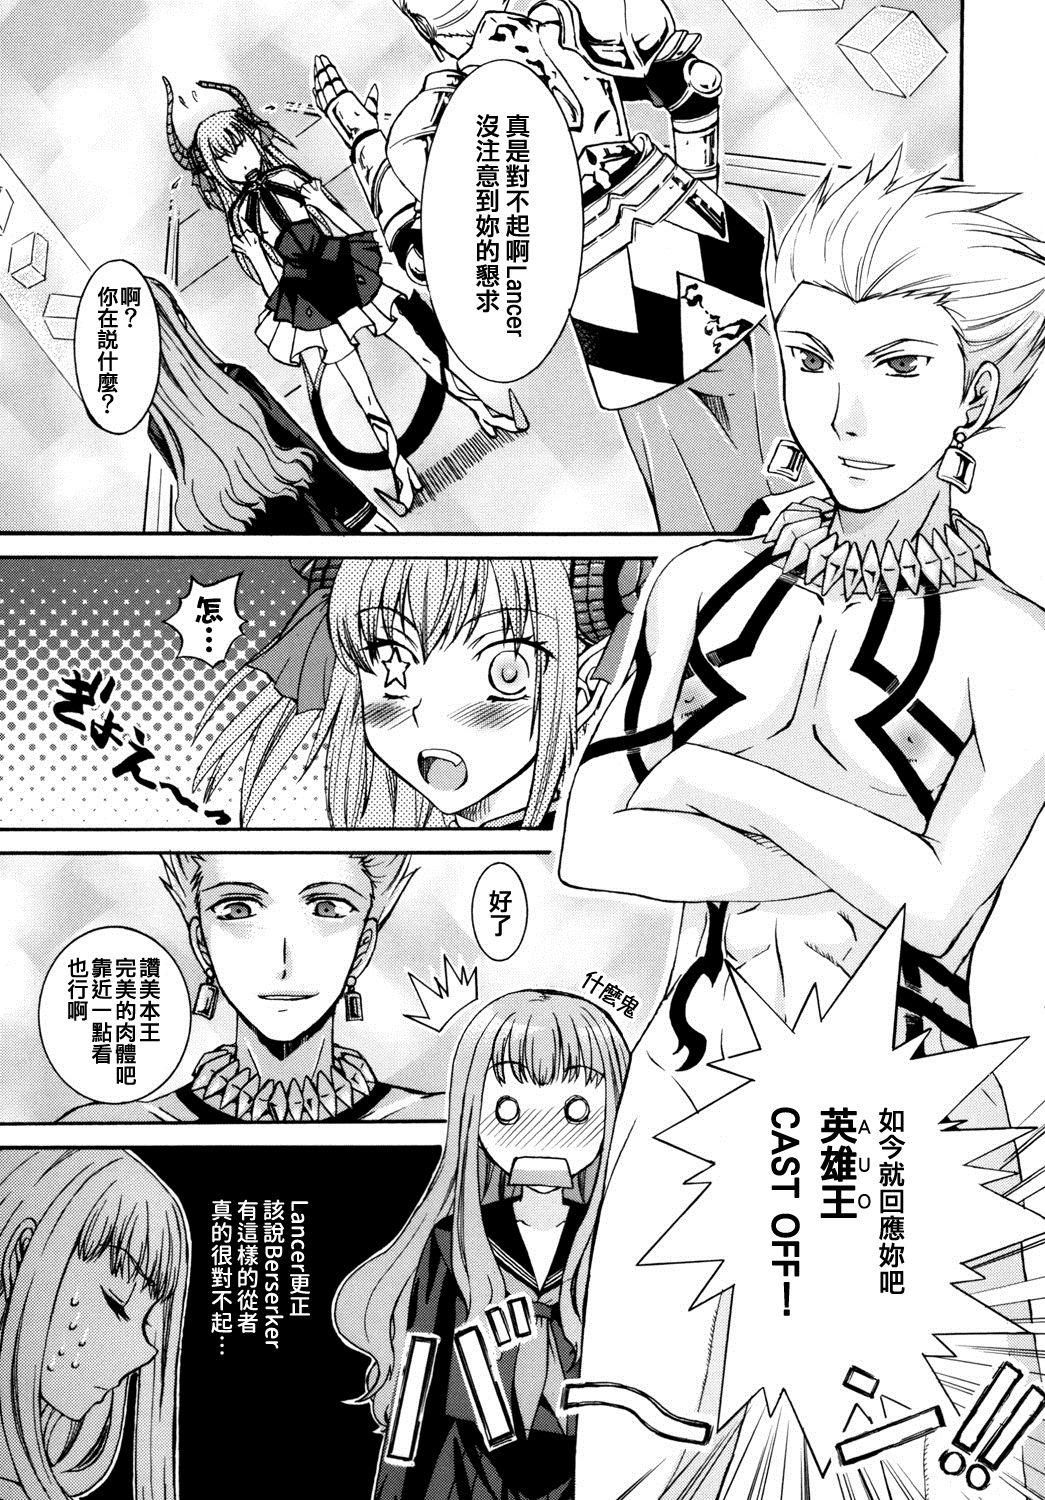 Indo Kore ga Watashi no Servant - This is my servant - Fate extra Cuckold - Page 7